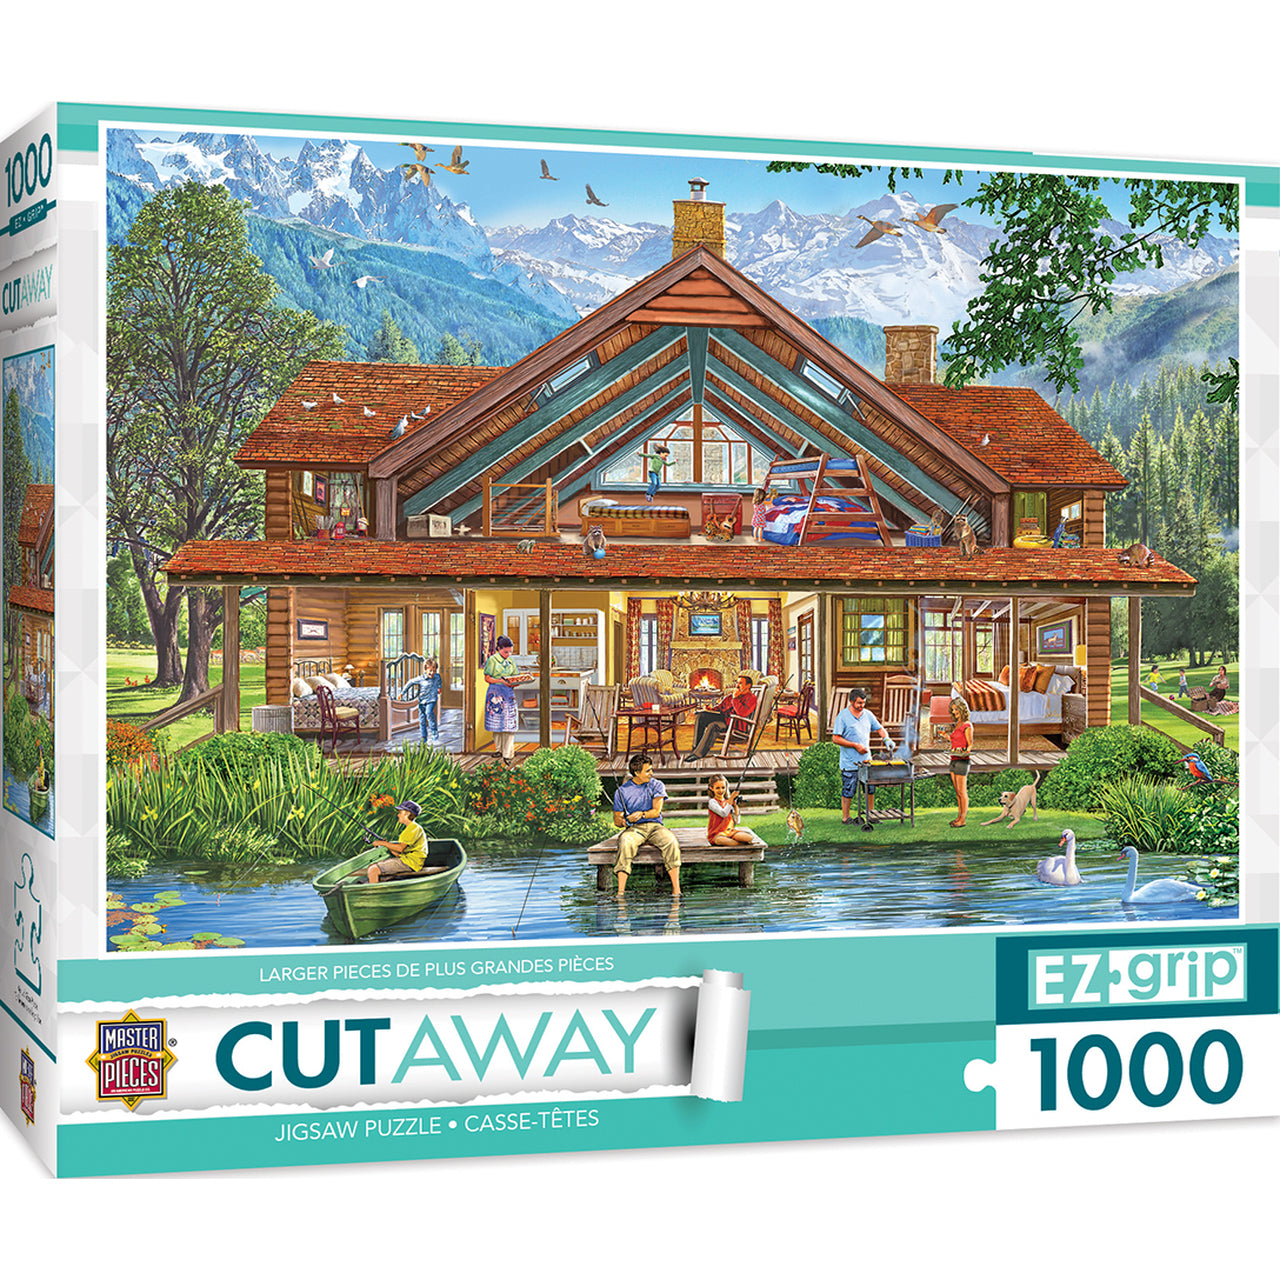 Cut-Aways Camping Lodge Large EZGrip 1000 Piece Jigsaw Puzzle by Masterpieces